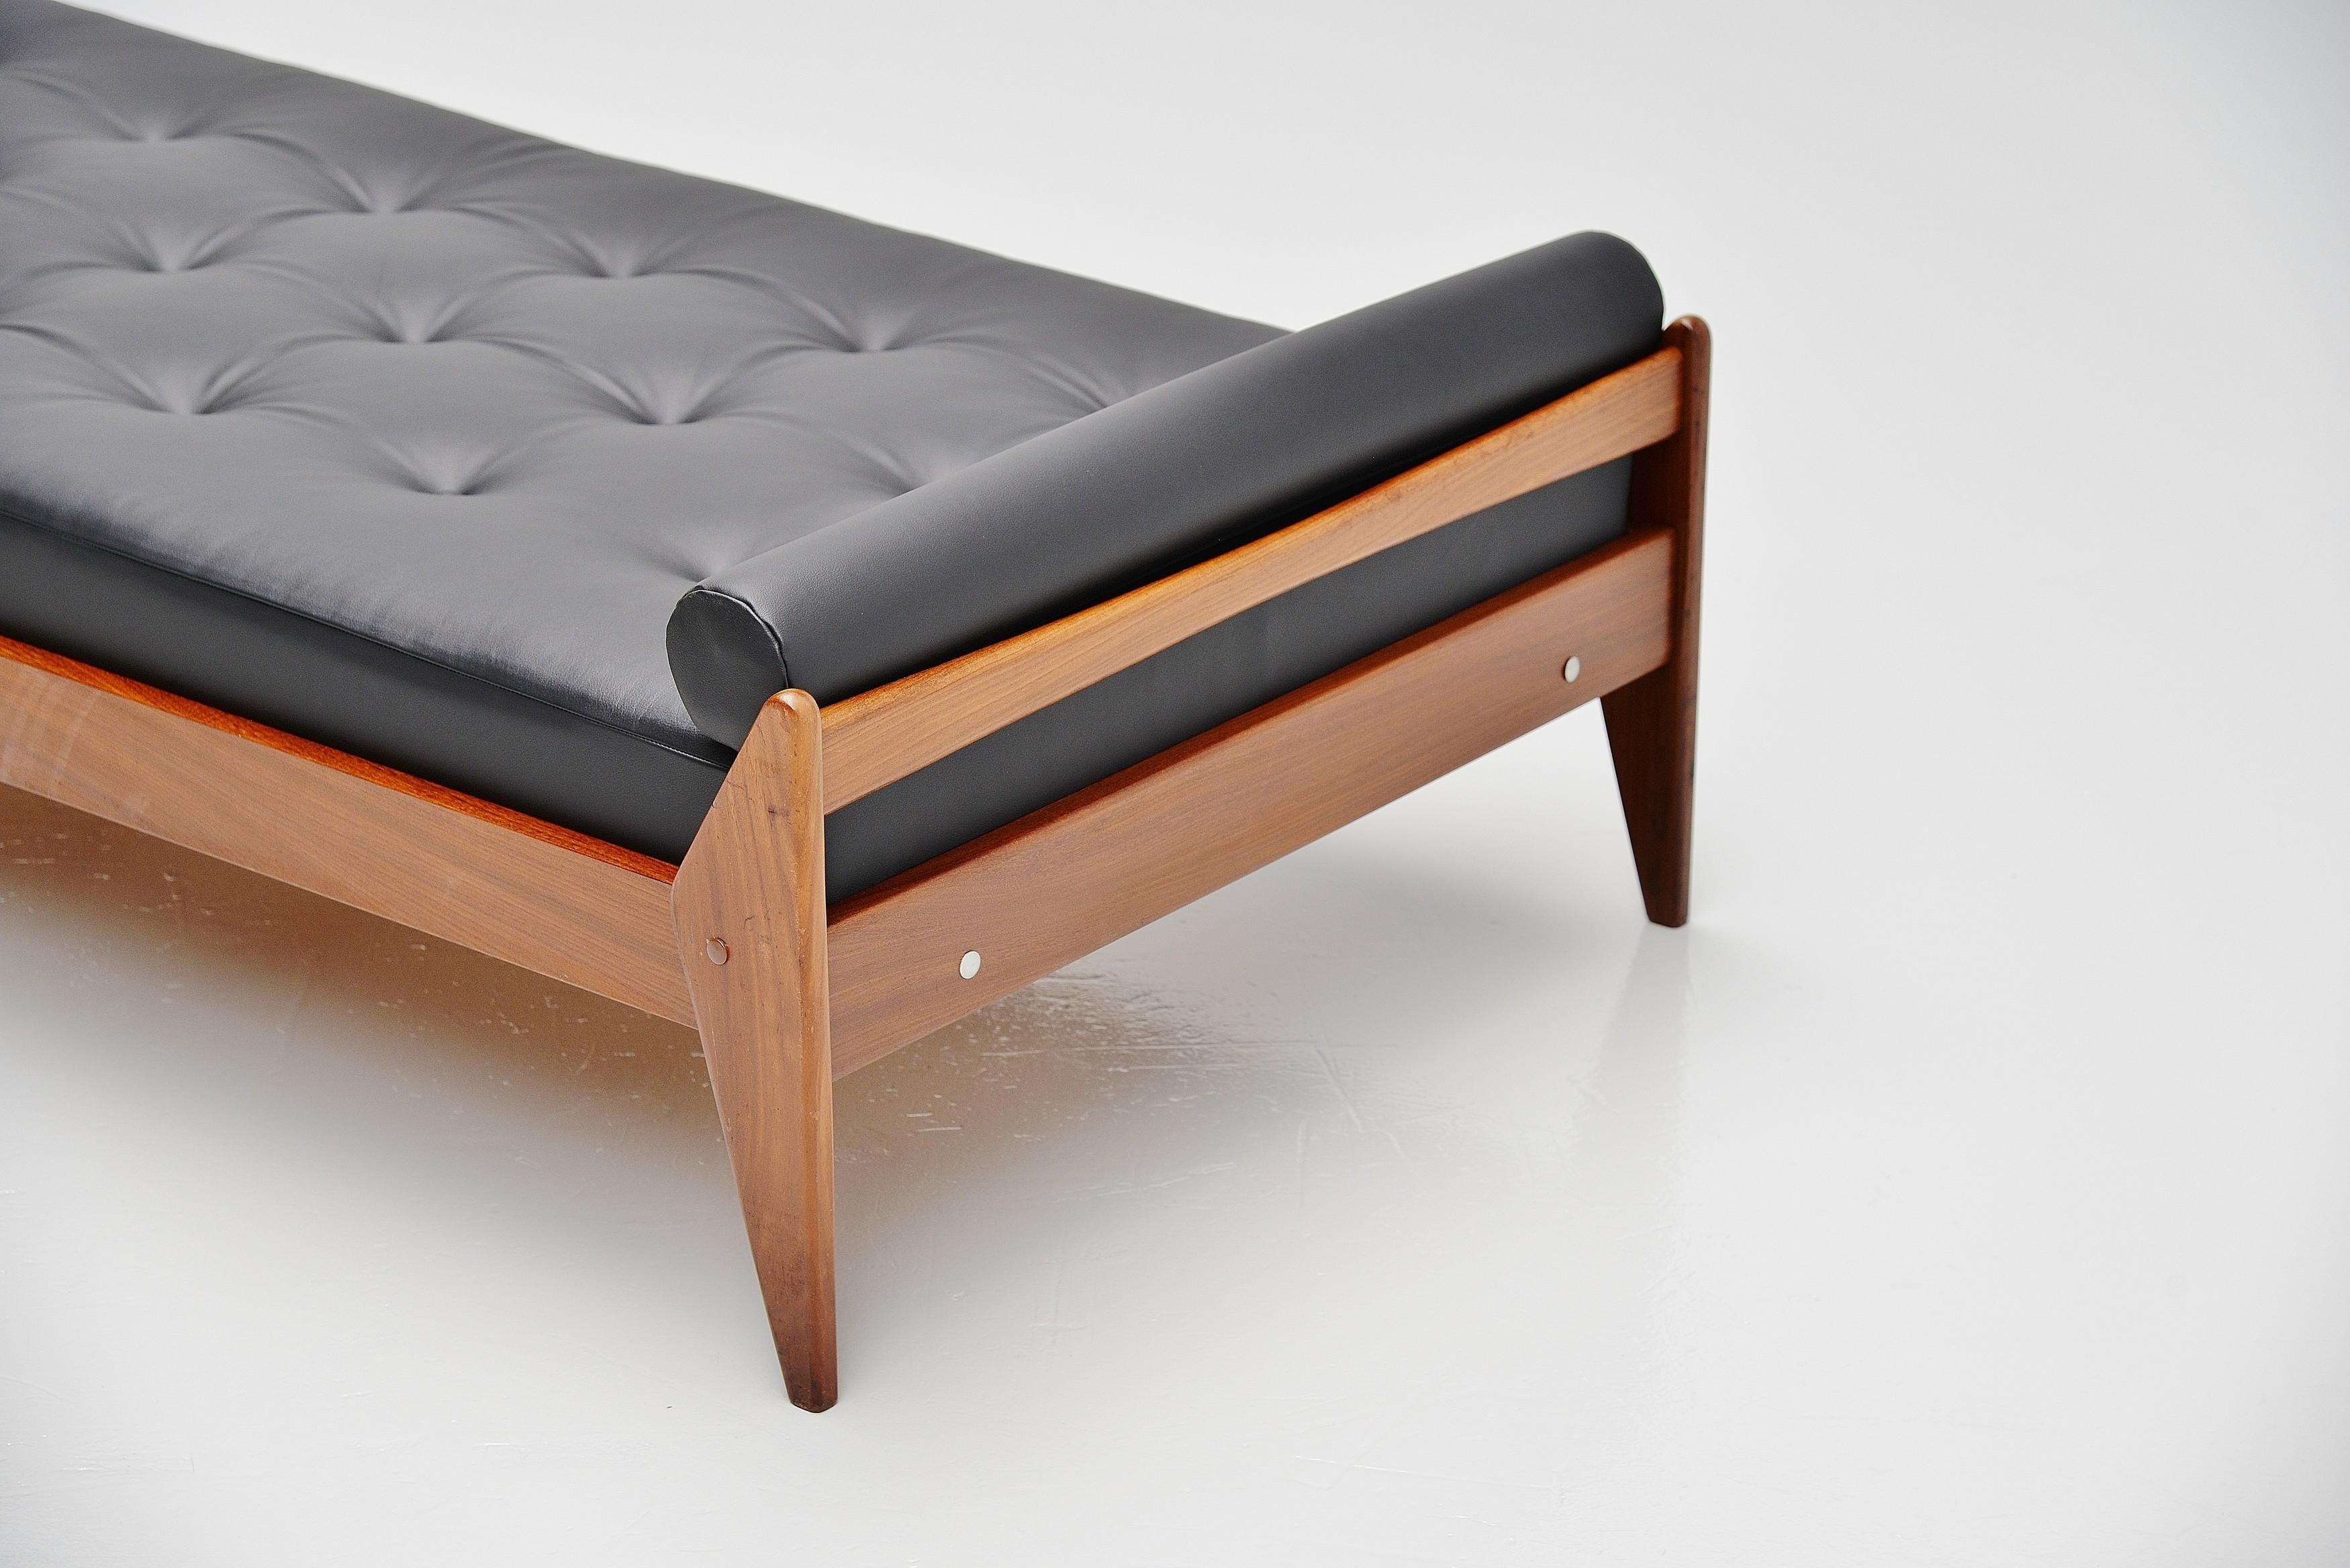 Very nicely Danish modern shaped teak daybed manufactured by Vamo Sonderborg, possible designed by Arne Wahl Iversen Denmark 1960. This bed is made of solid teak and we upholstered it with high quality smooth black leather from Hulshoff. This black